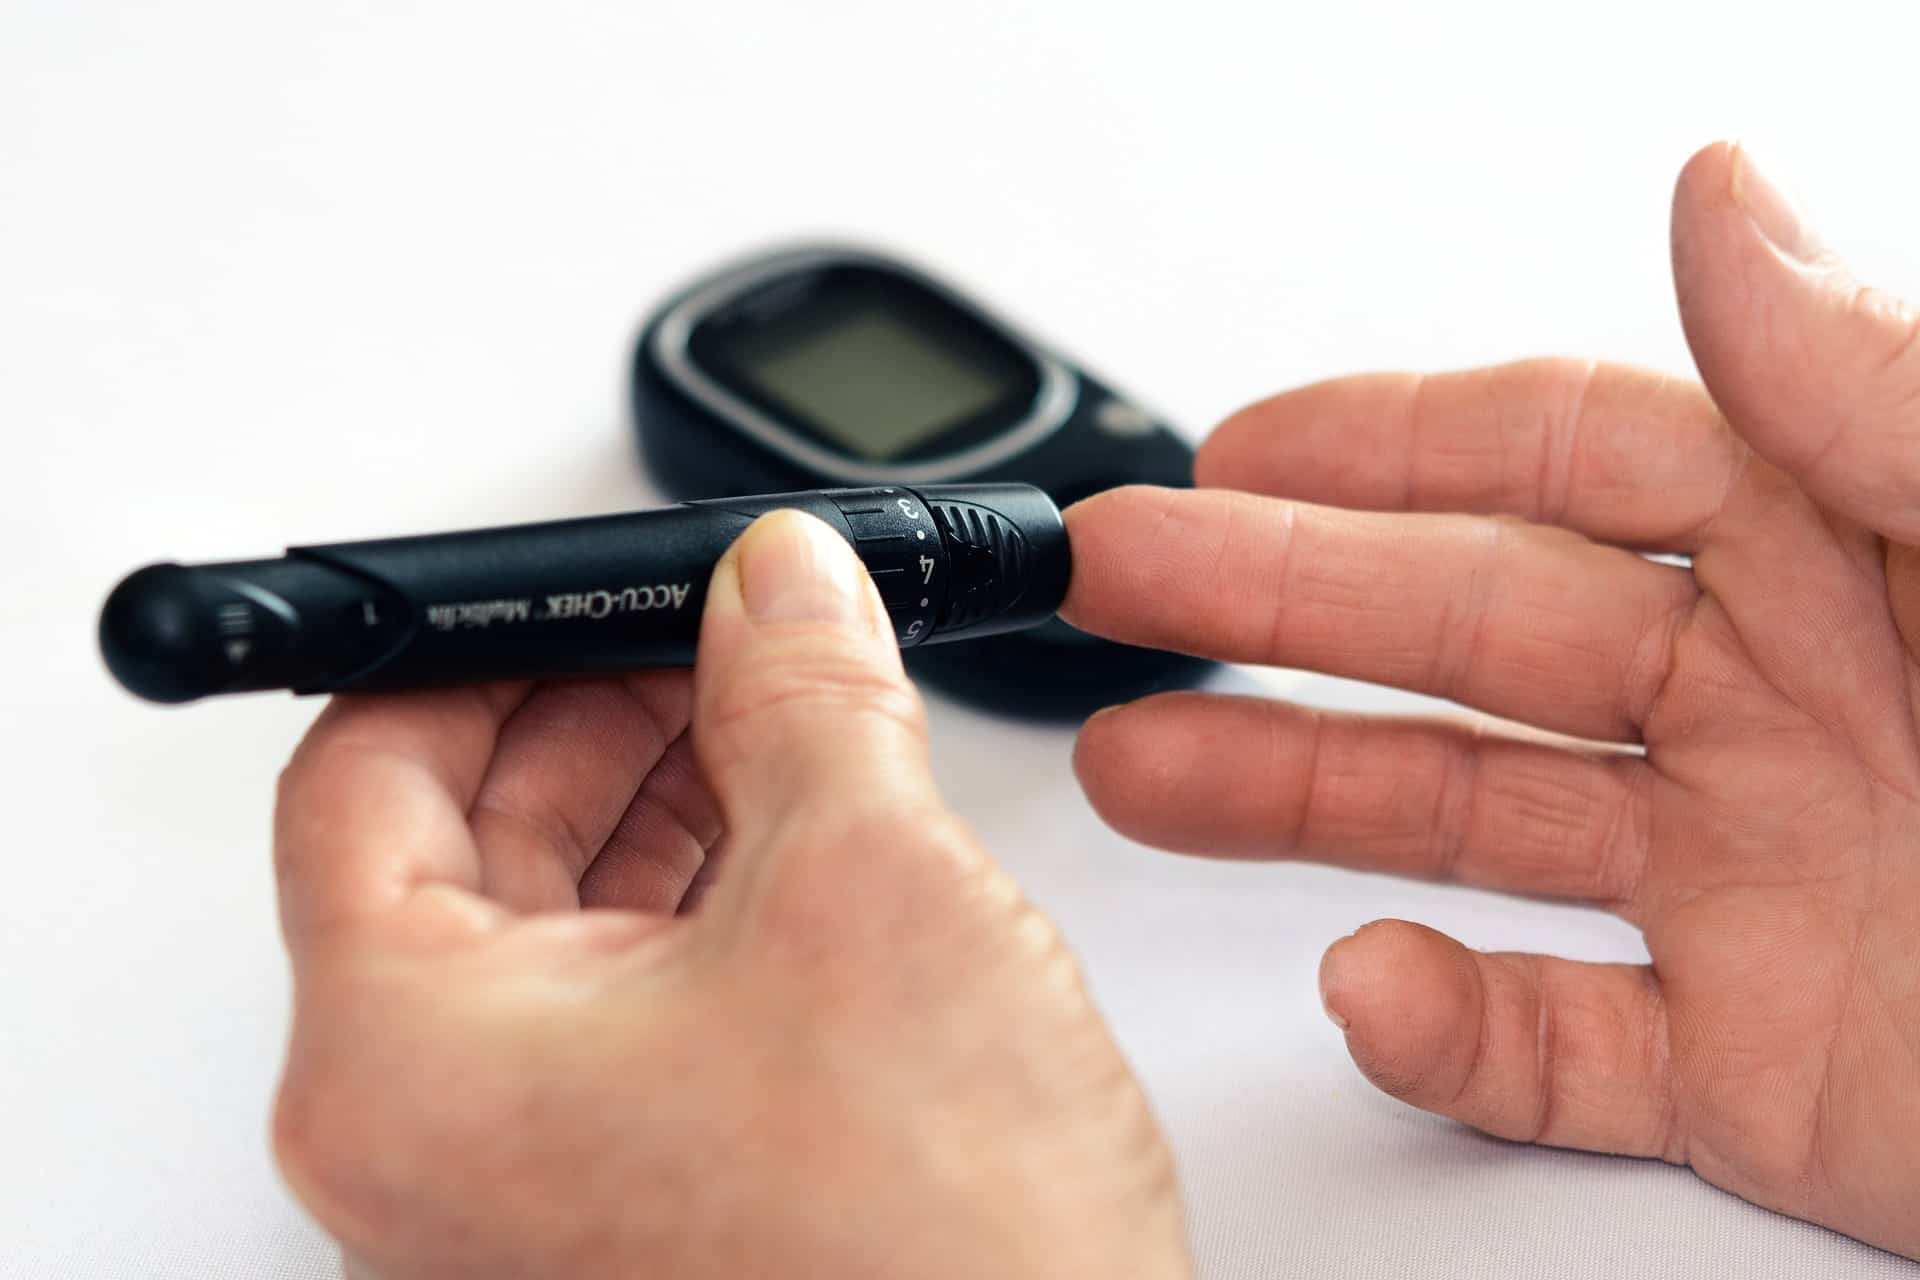 They reveal that an alarming number of people are at risk of diabetes in Venezuela